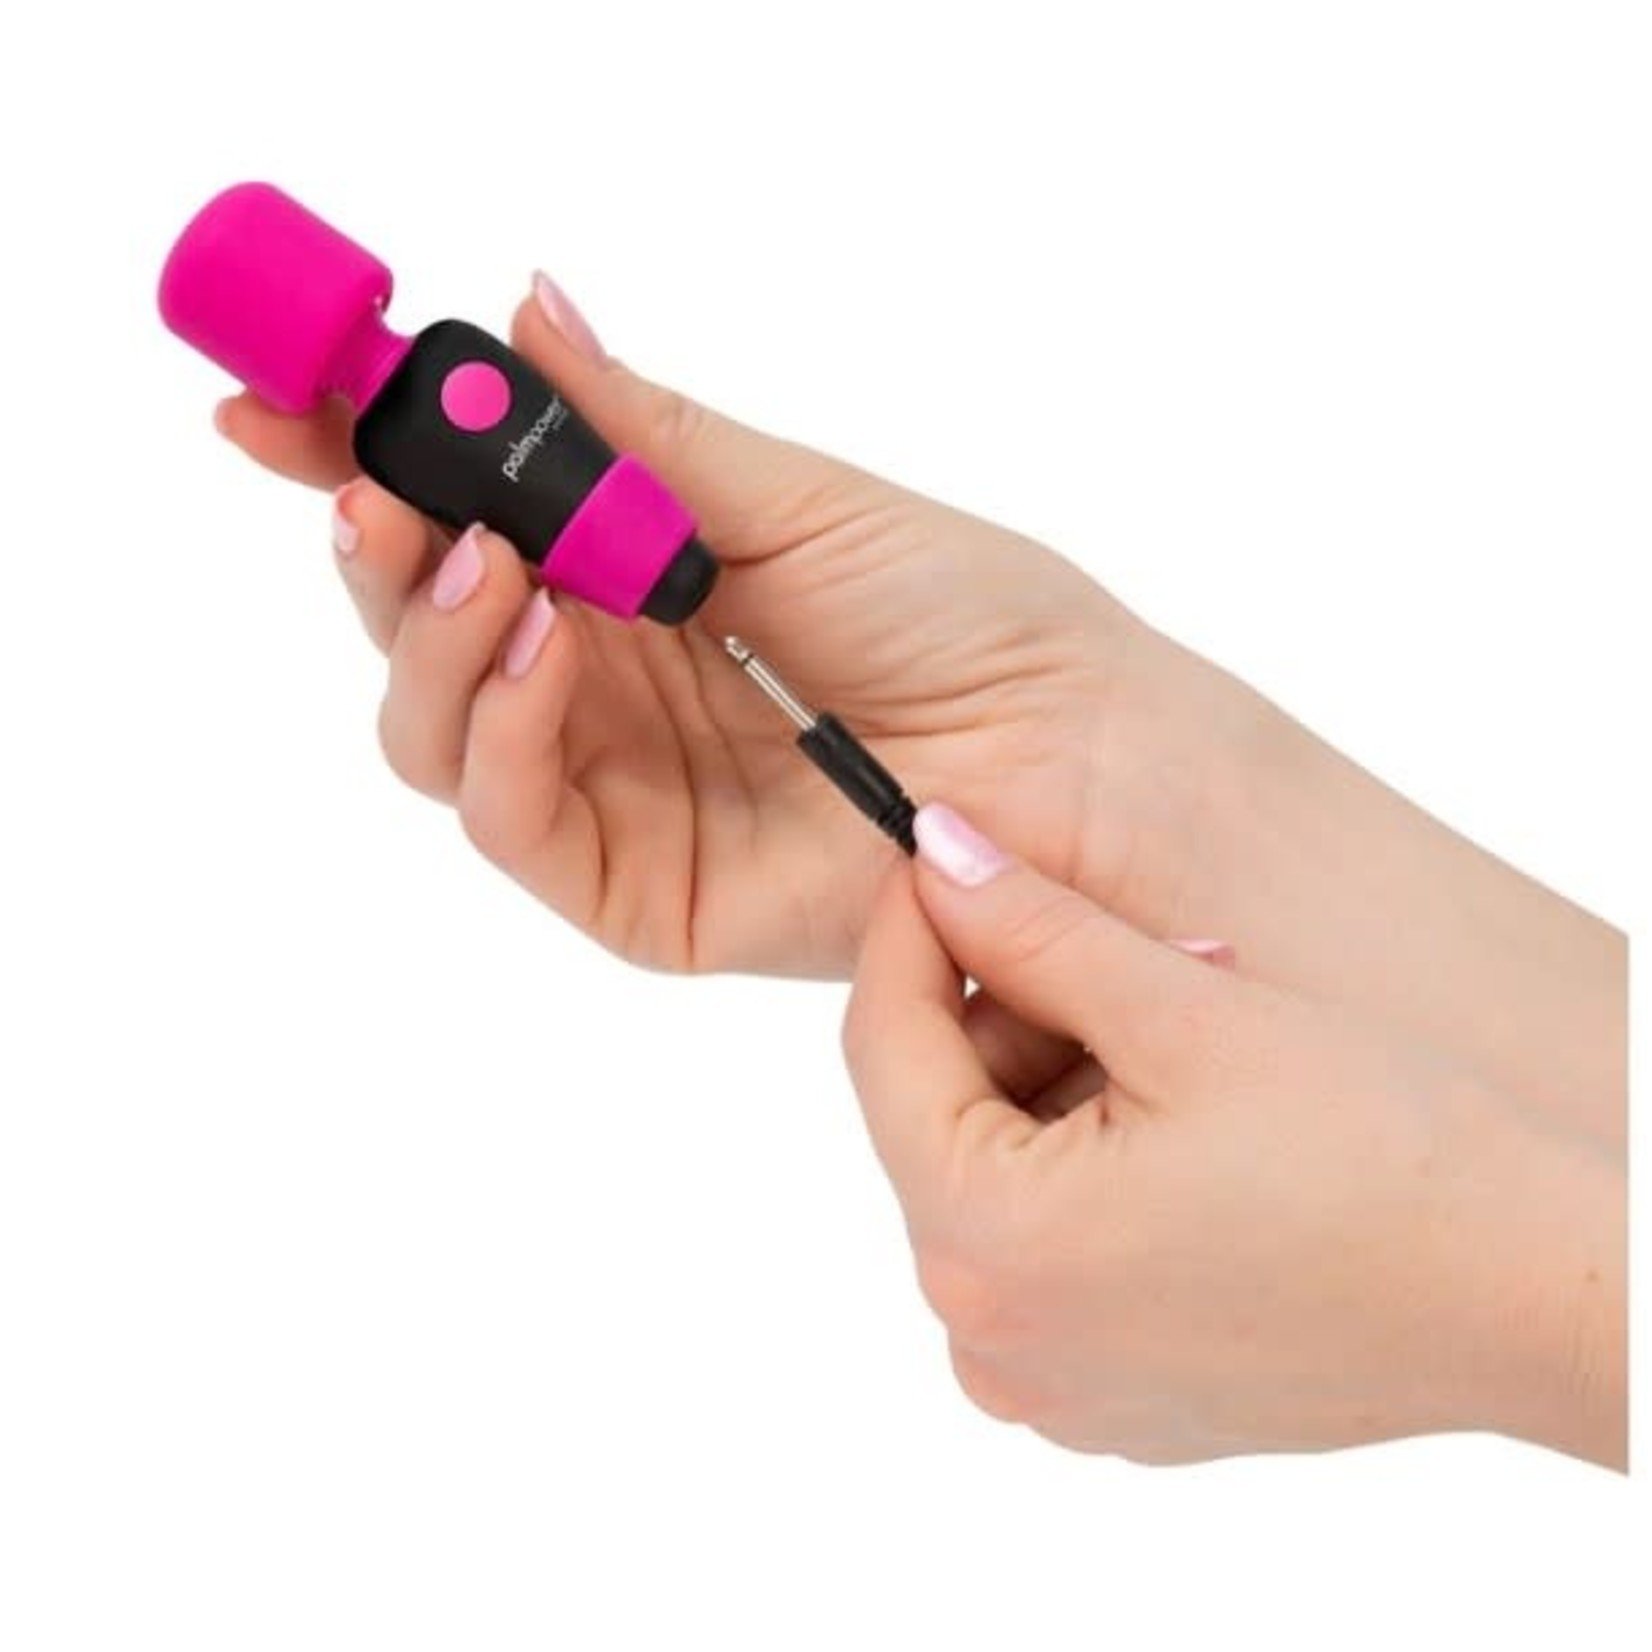 PALMPOWER POCKET - RECHARGEABLE MINI MASSAGER